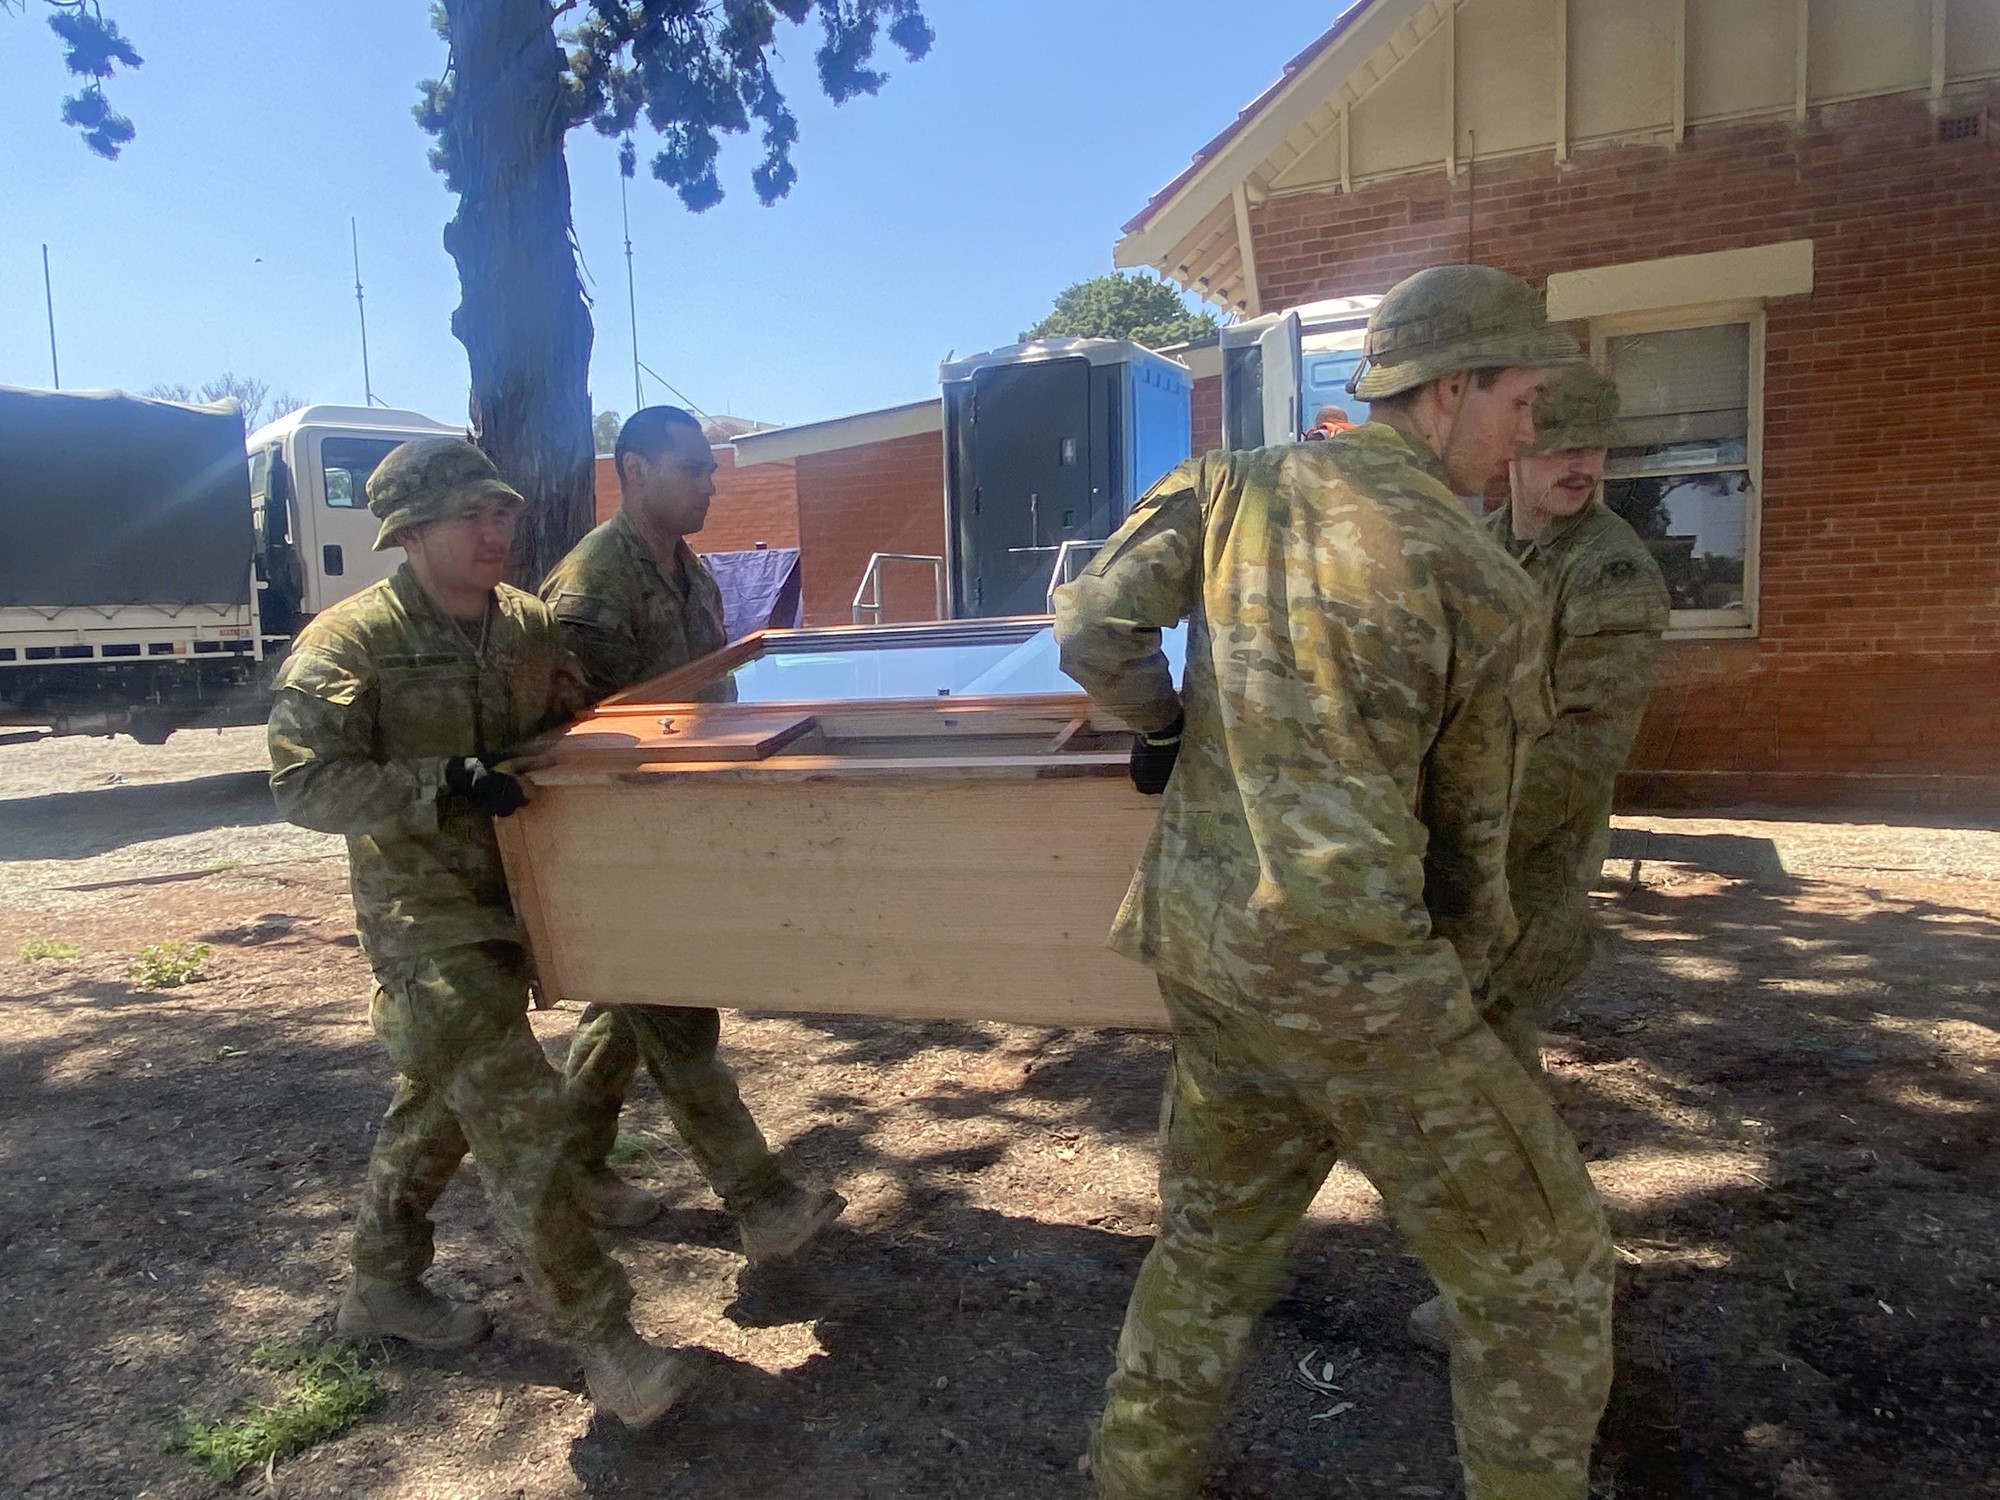 ADF personnel lift cabinets.